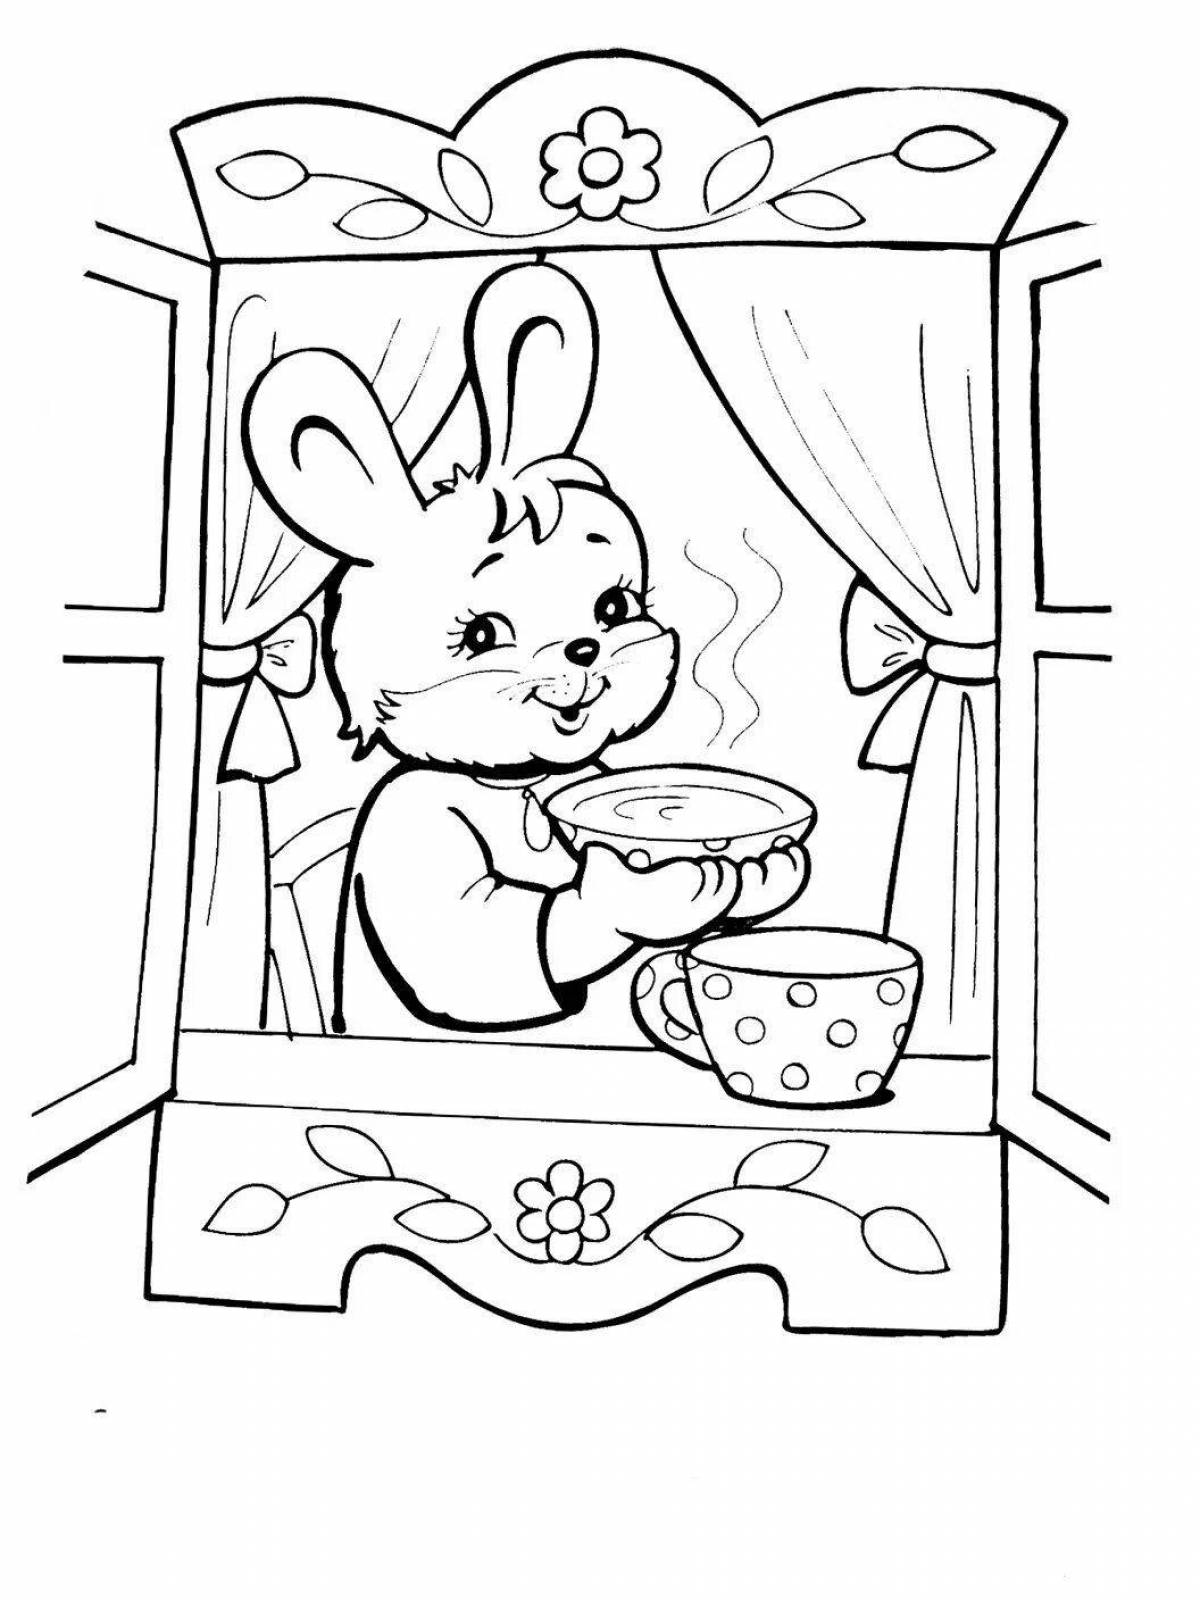 A fox and a hare coloring page for children